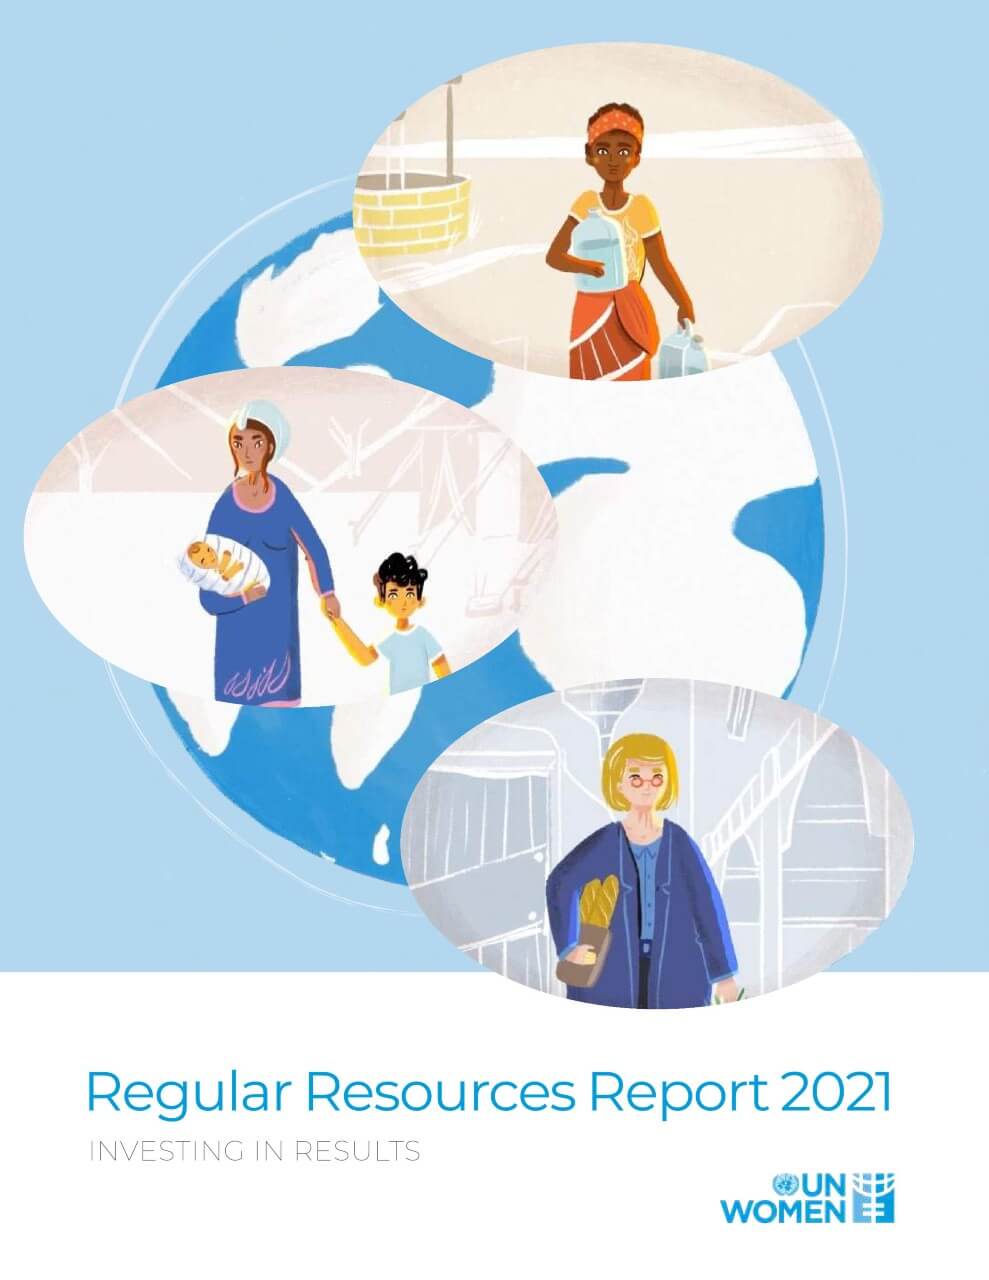 Regular resources report 2021: Investing in results